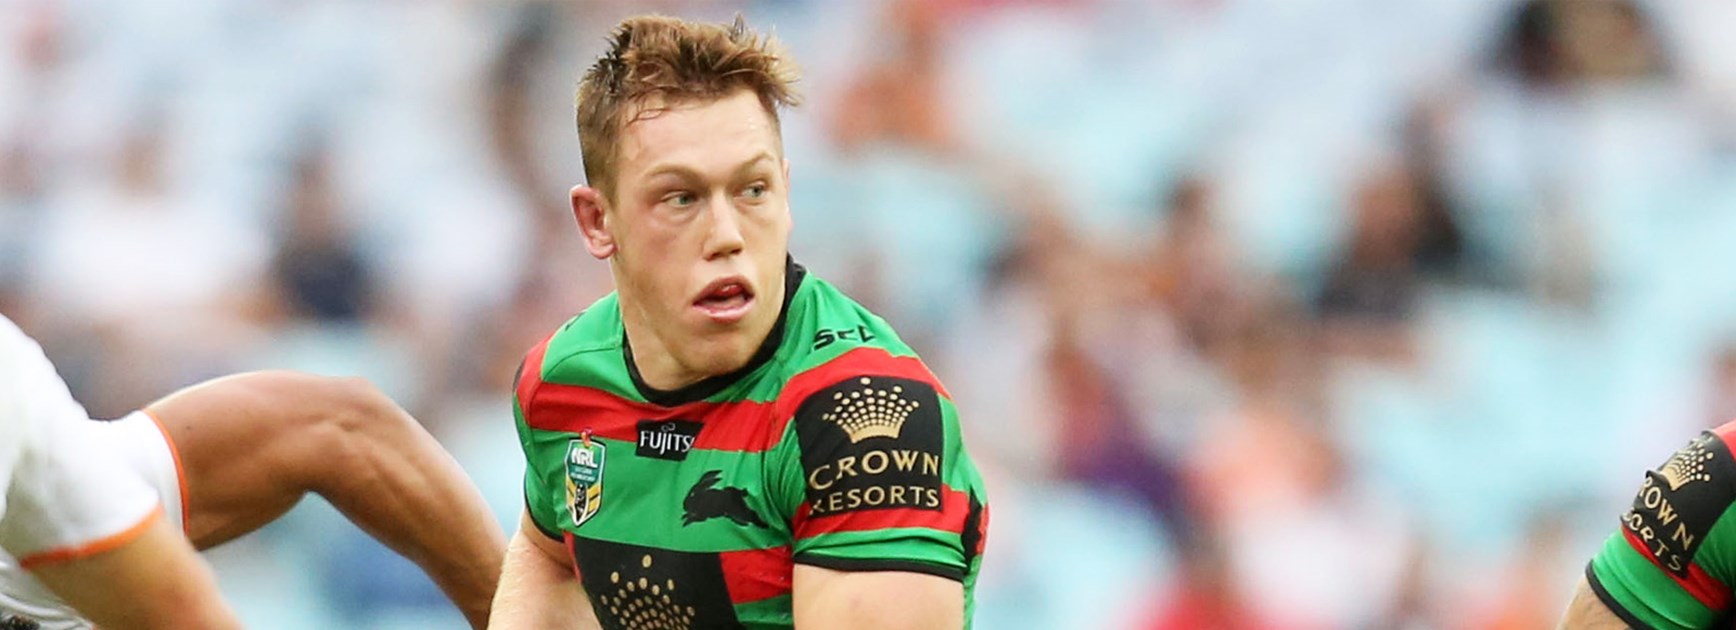 Rabbitohs hooker Cameron McInnes is happy battling new signing Damien Cook for the Souths No.9 jersey.